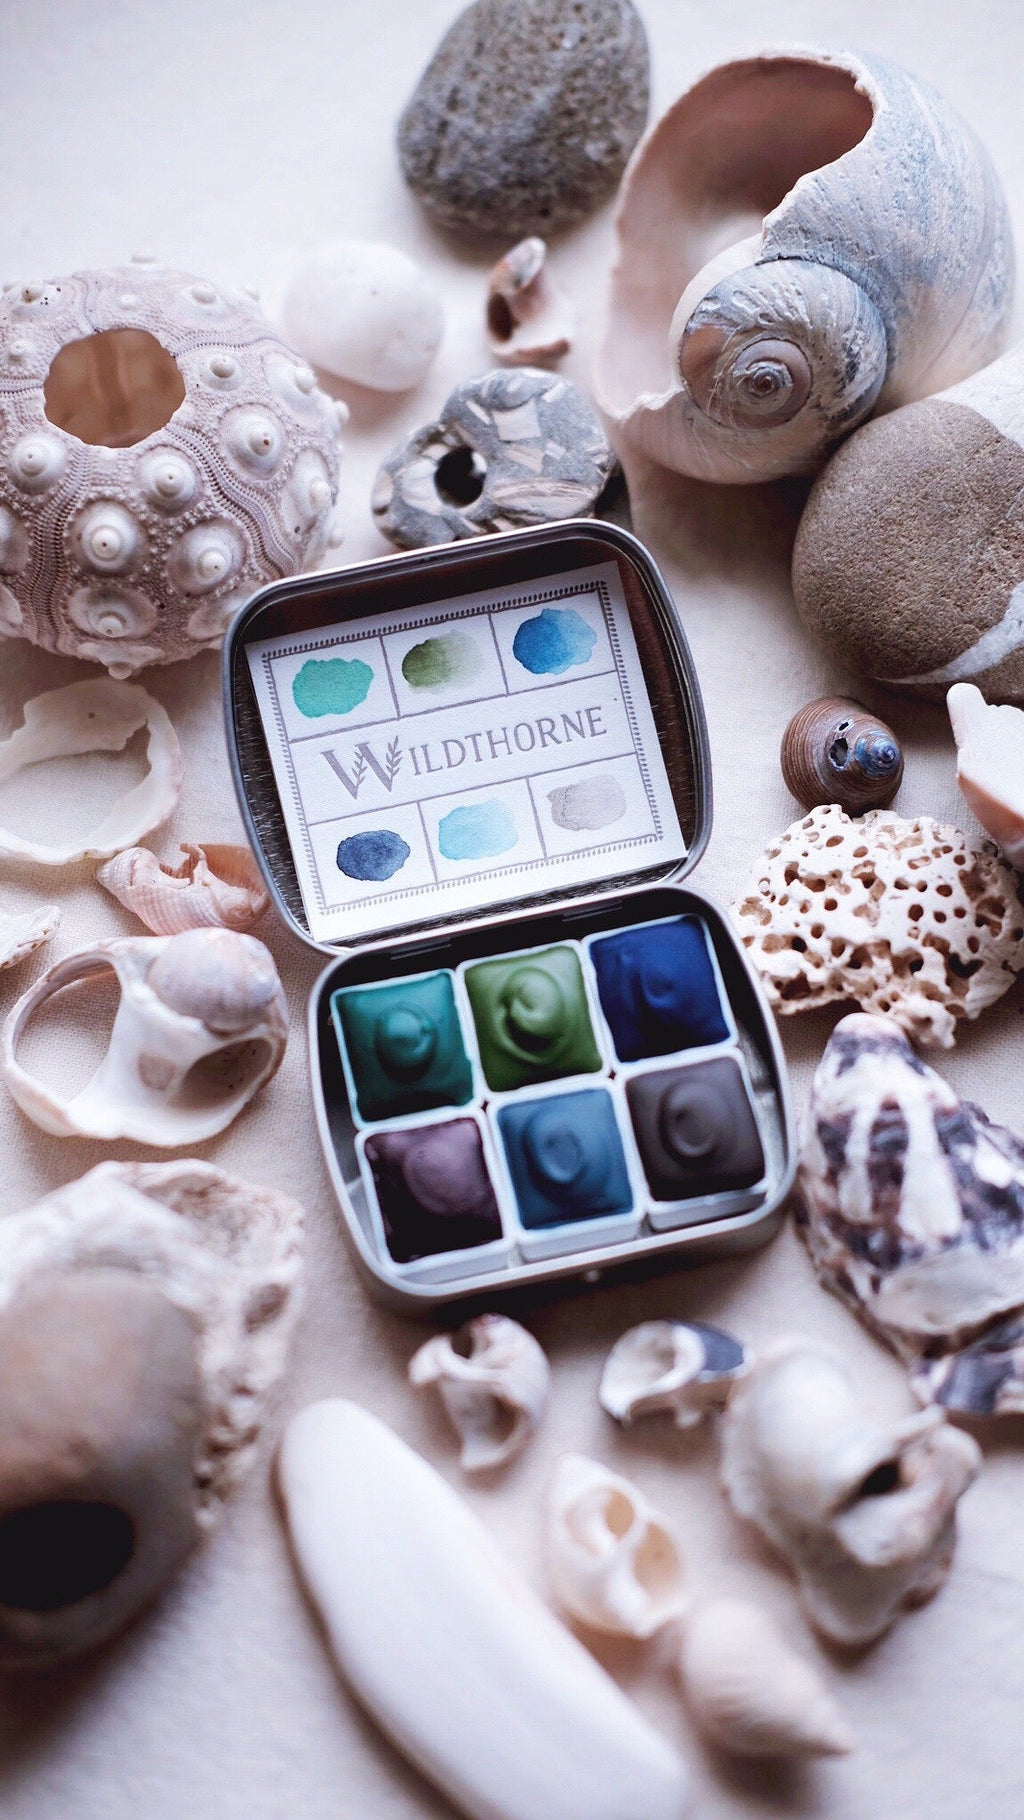 RESERVE for Rosemary + Ocean Sediment + Mineral watercolor palette